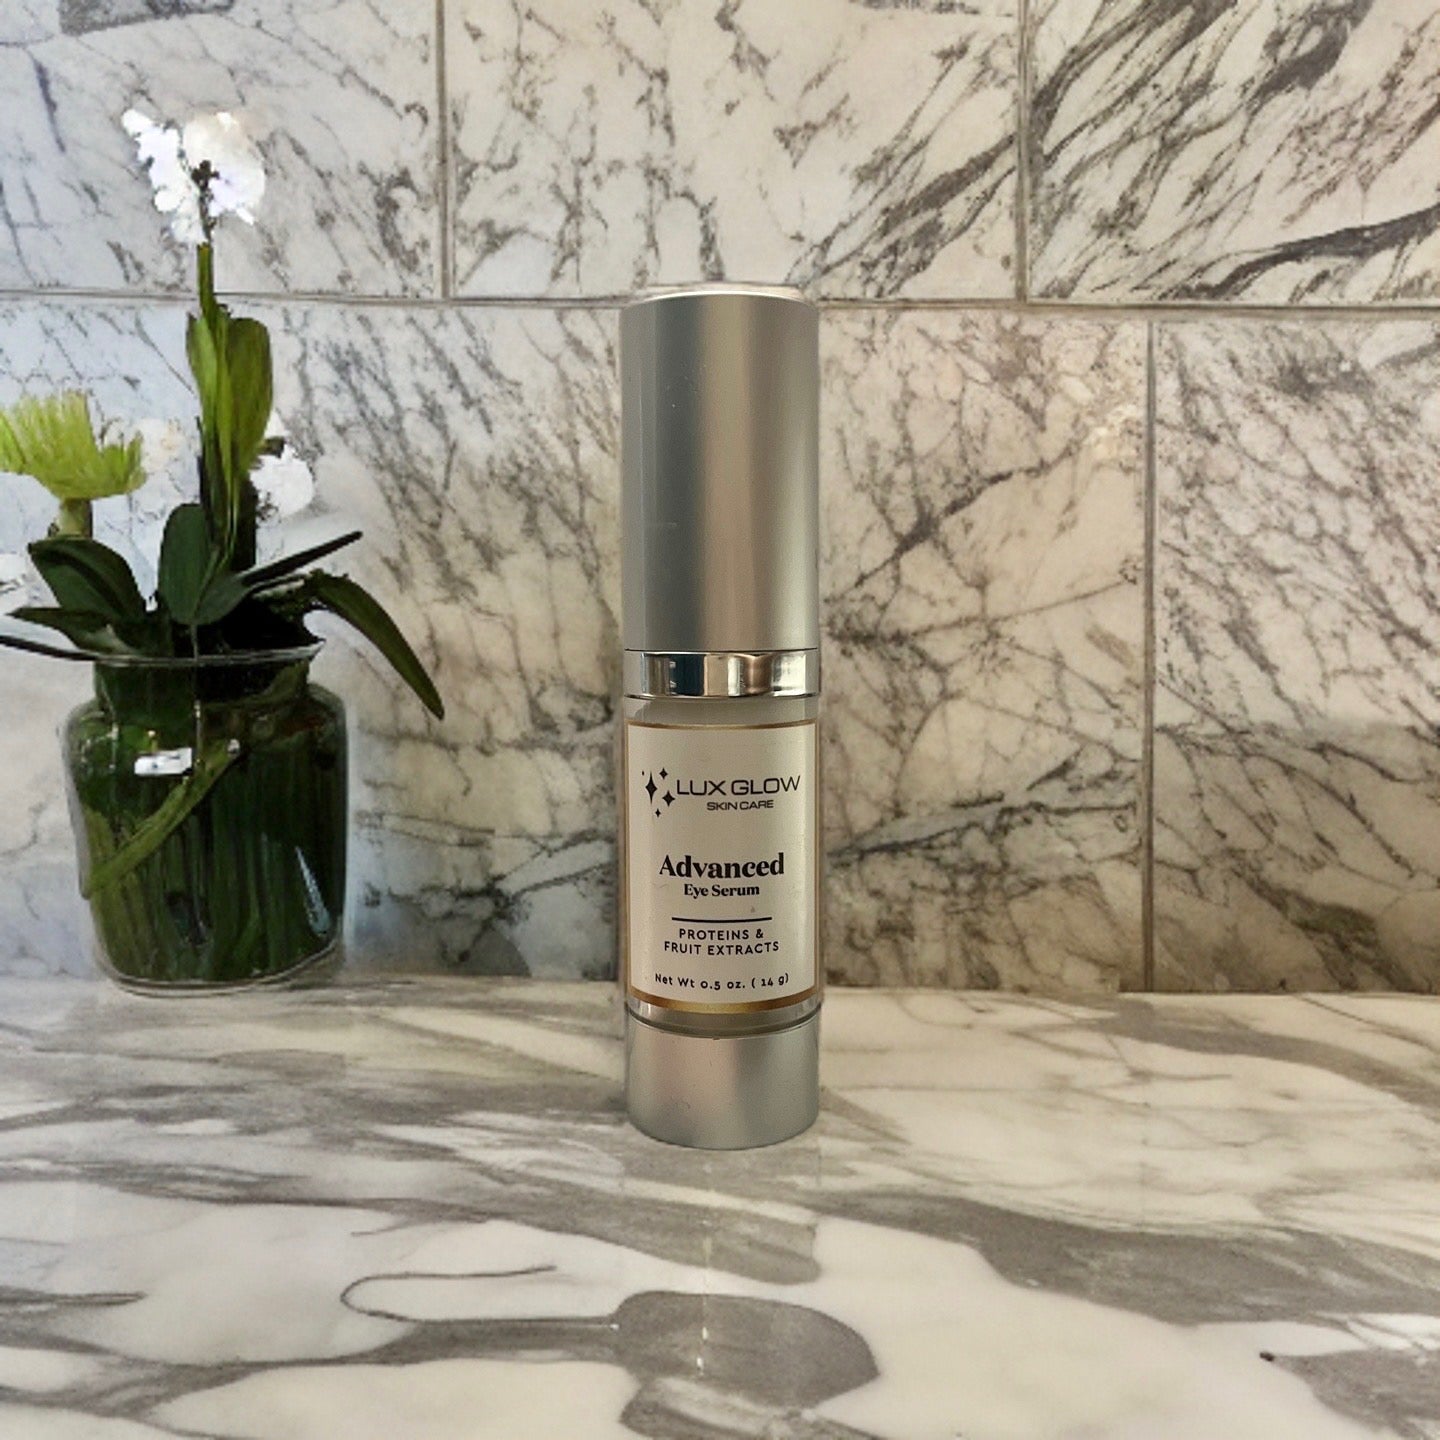 Nourish your eyes with natural botanicals! Our plant-based eye serum is specifically designed to reduce wrinkles, puffiness, and dark circles around the eyes. Get ready to experience beautiful and glowing eyes with our Advanced Eye Serum!